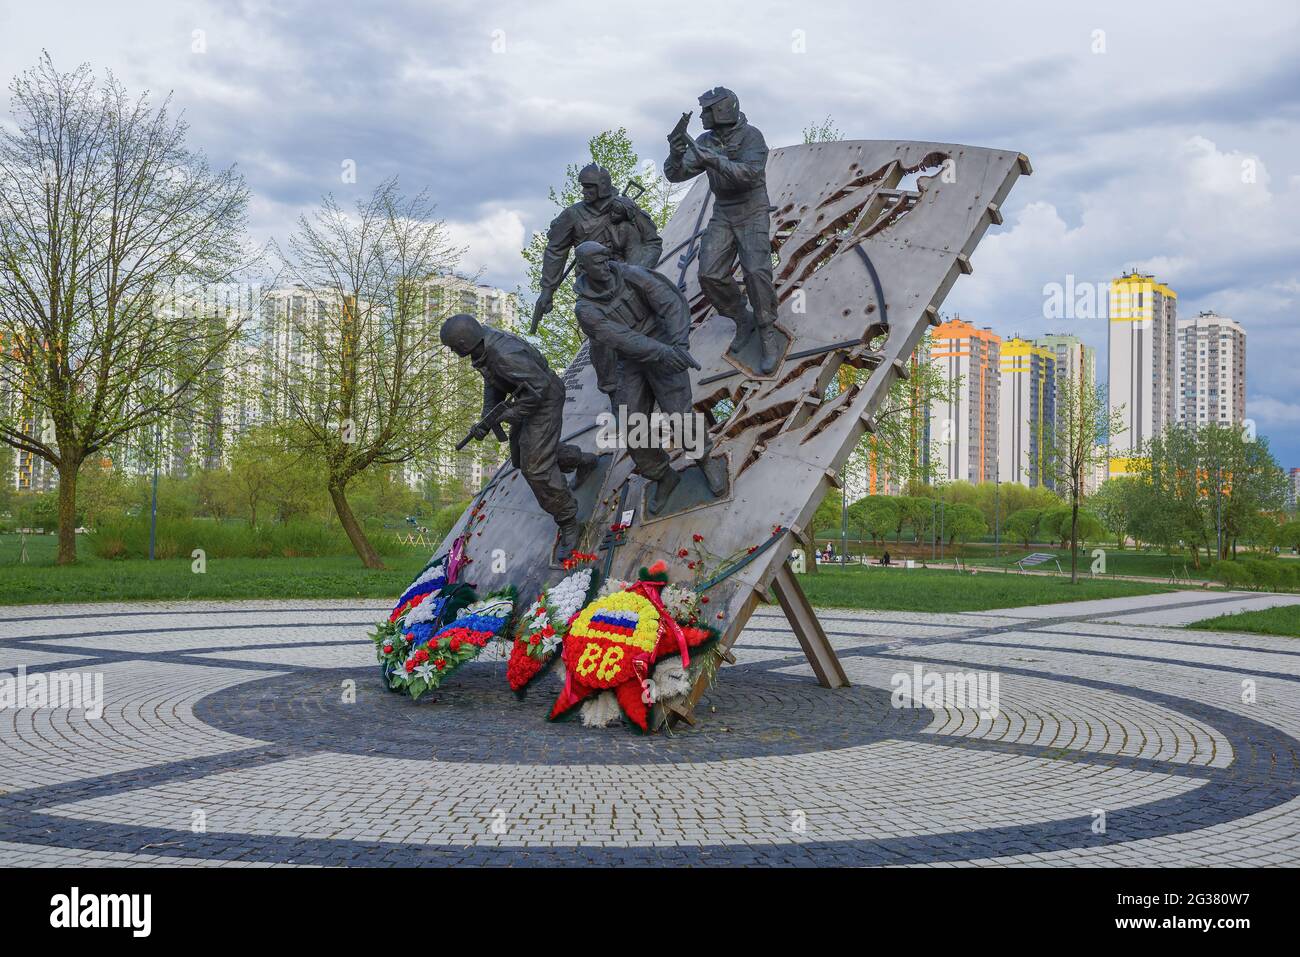 SAINT PETERSBURG, RUSSIA - MAY 15, 2021: Monument to the soldiers of special units of the Russian Federation on a cloudy May day. Park of Internationa Stock Photo